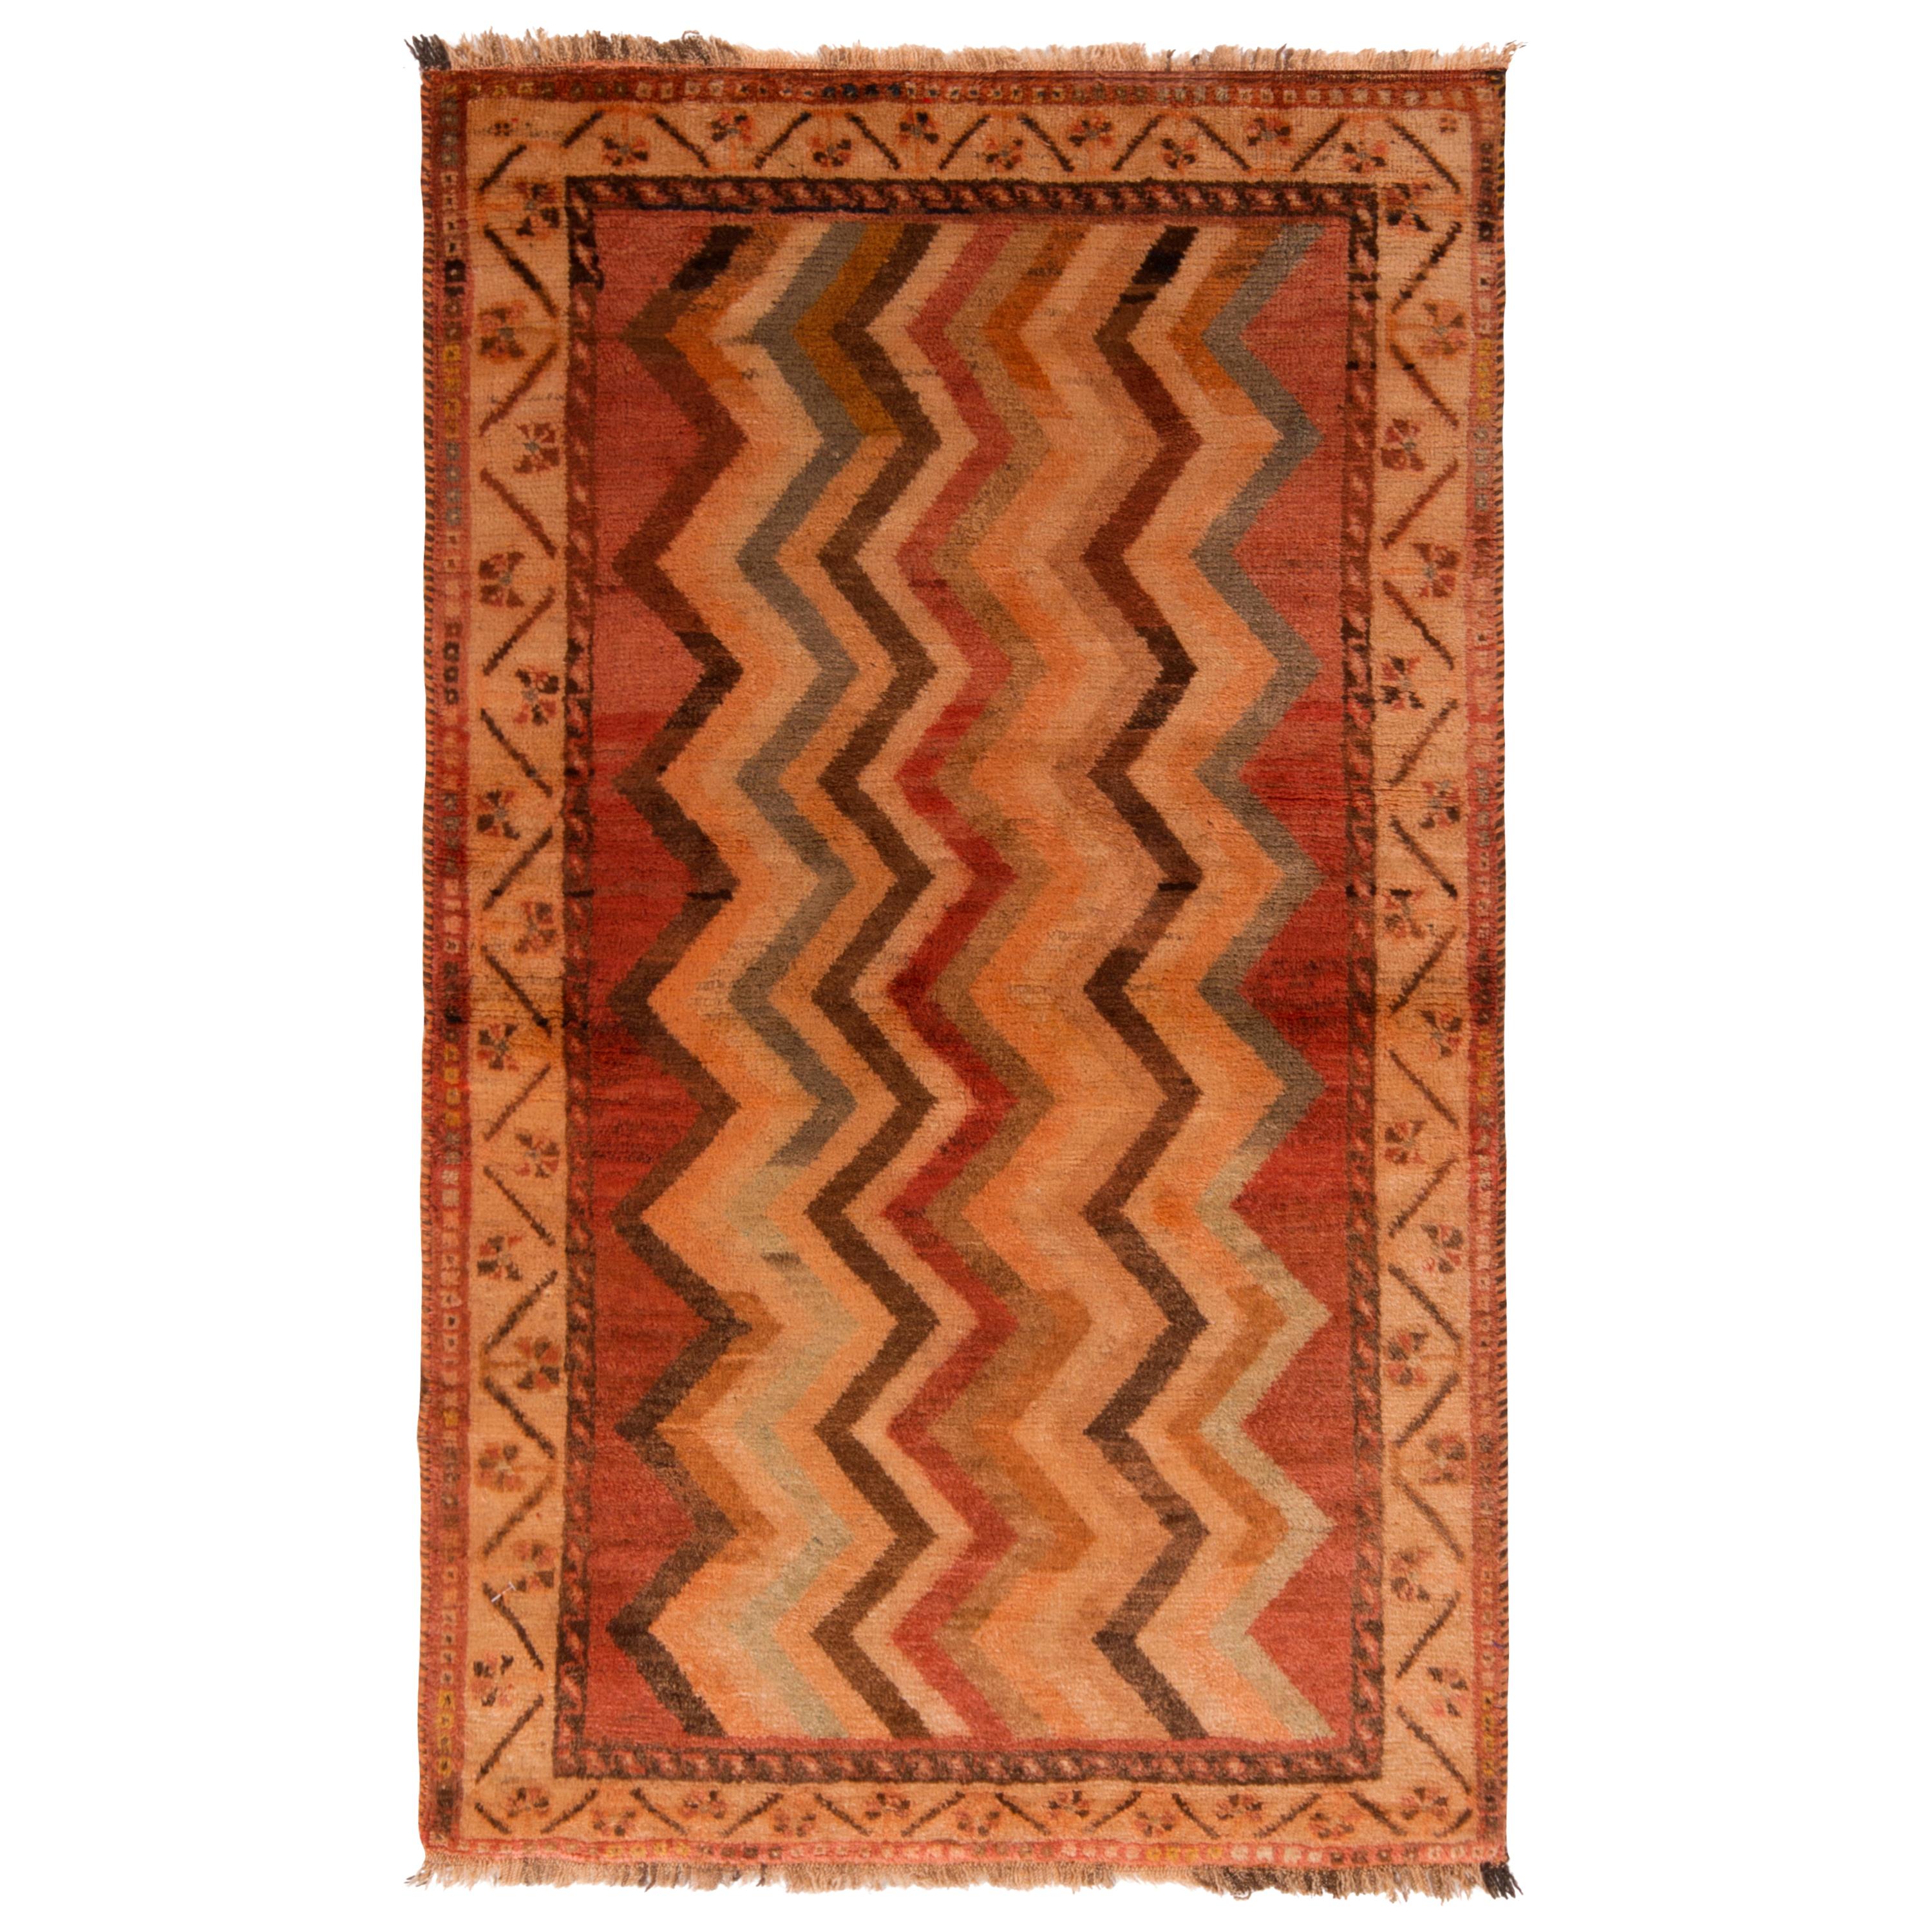 Antique Gabbeh Geometric Beige-Brown and Red Wool Persian Rug by Rug & Kilim